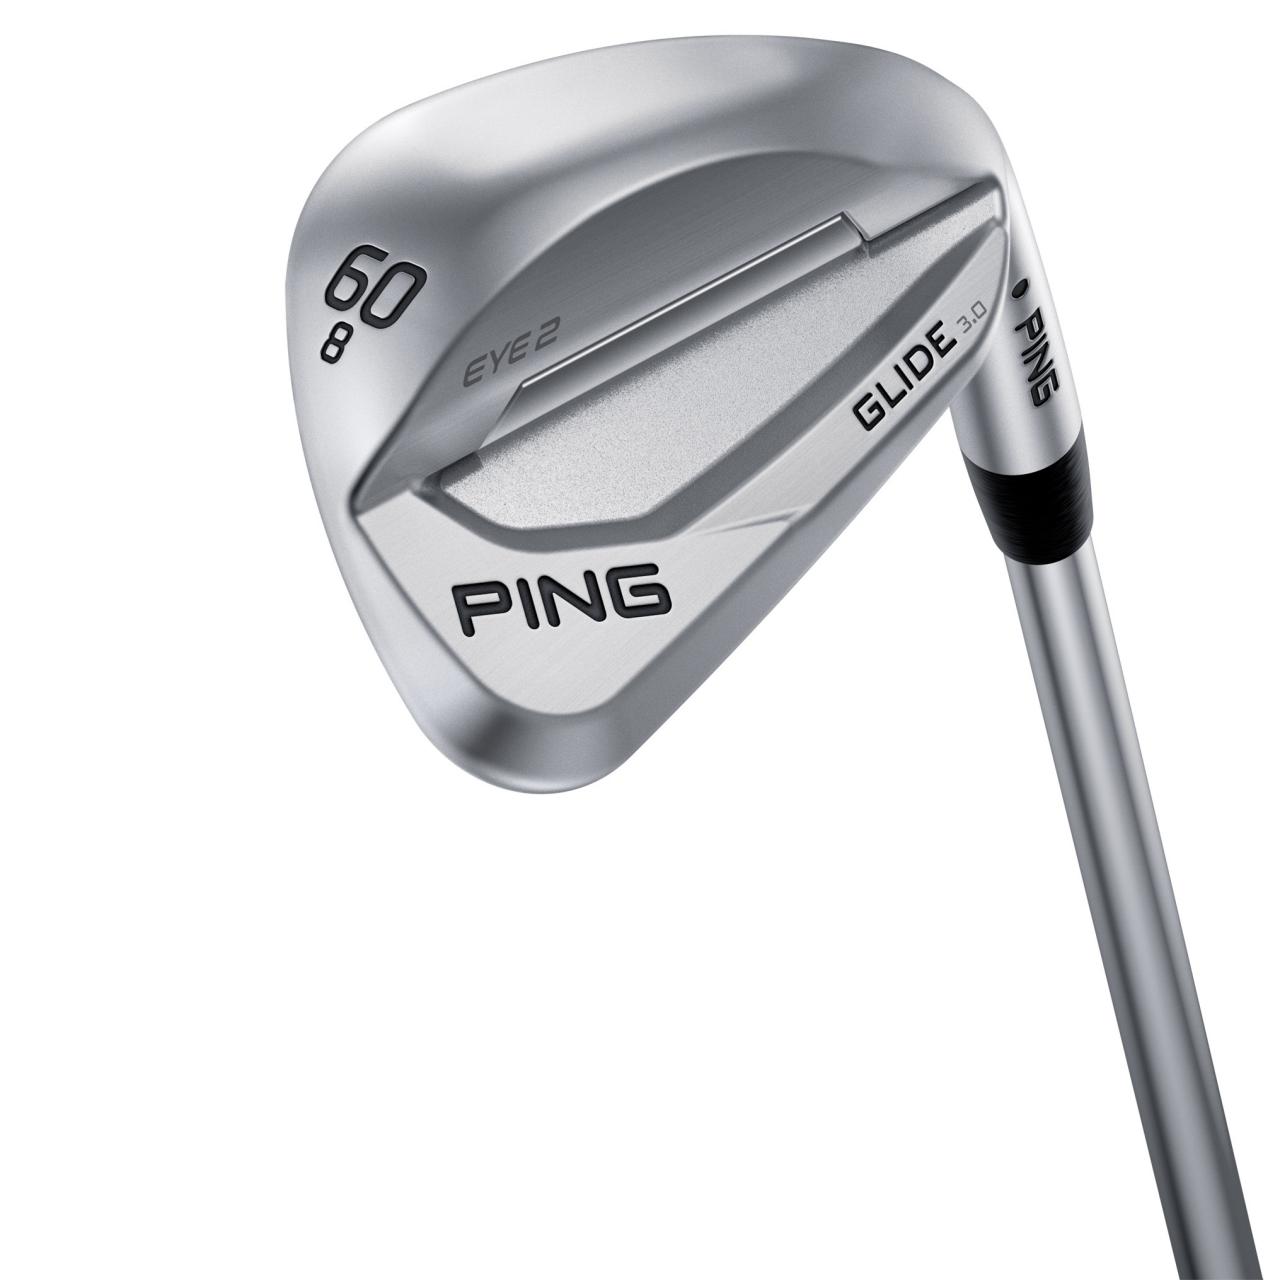 Ping re-imagines its wedge line with the new Glide 3.0